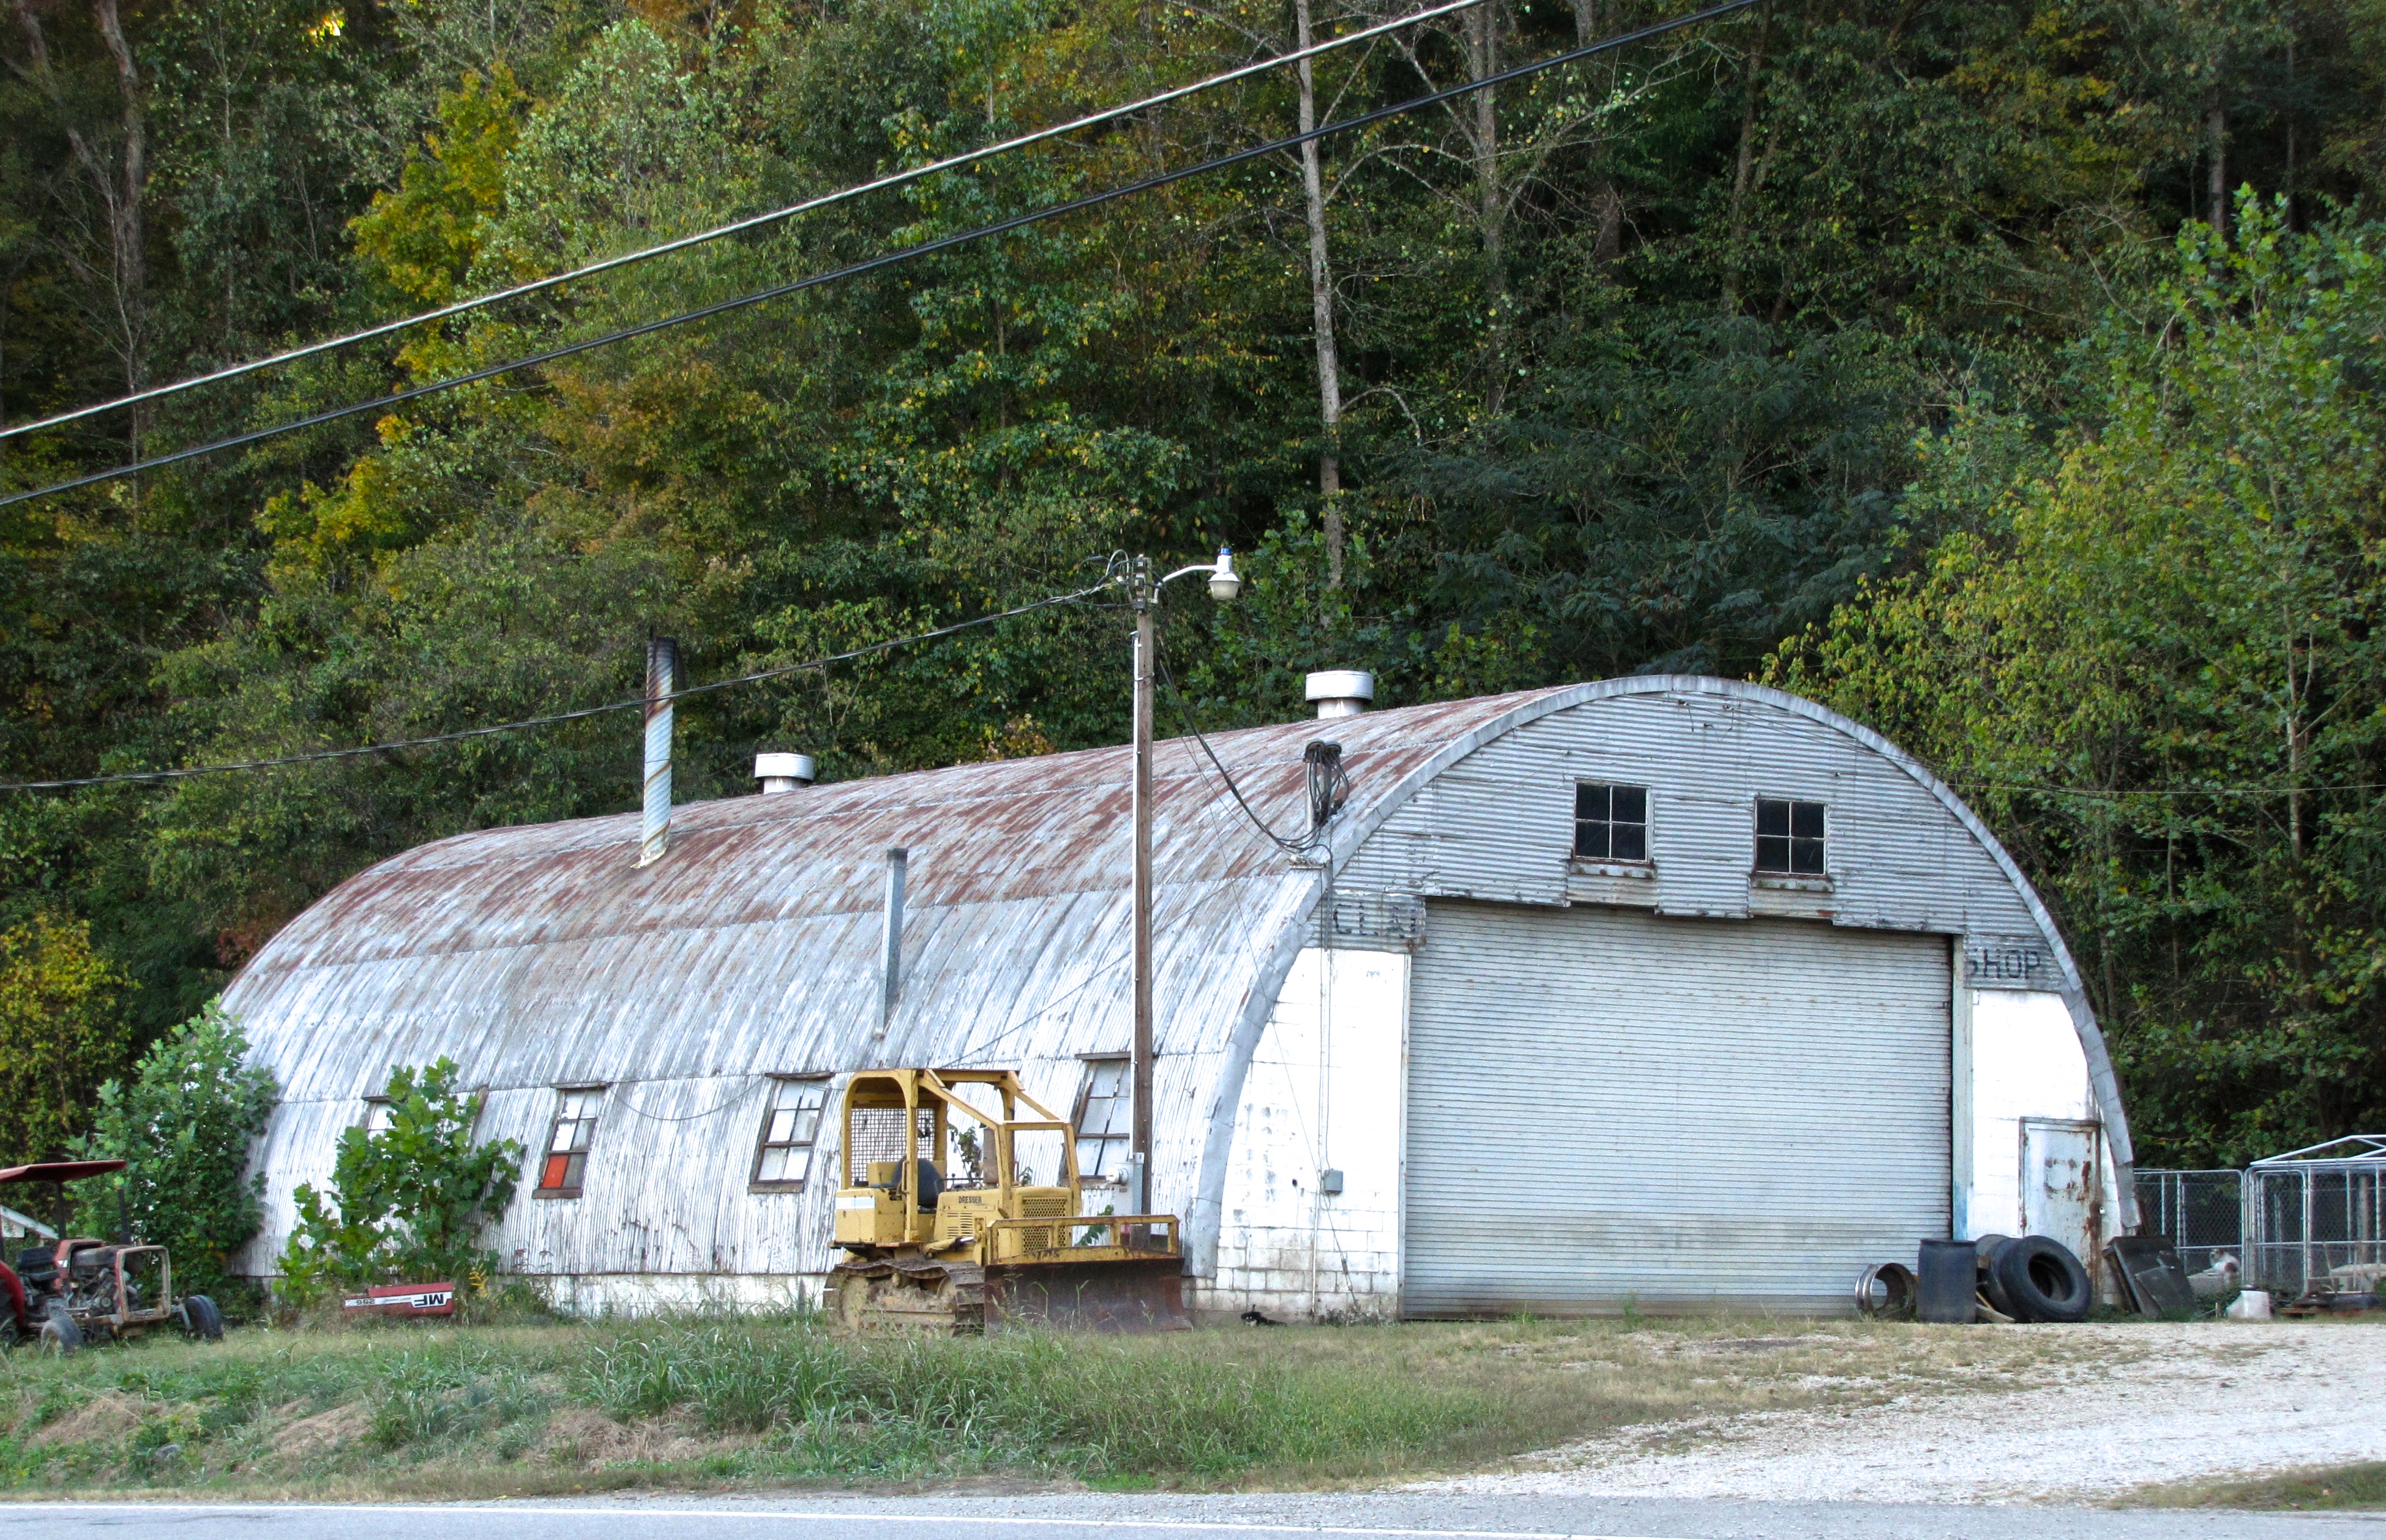 quonset hut in Terms Of Service, NY